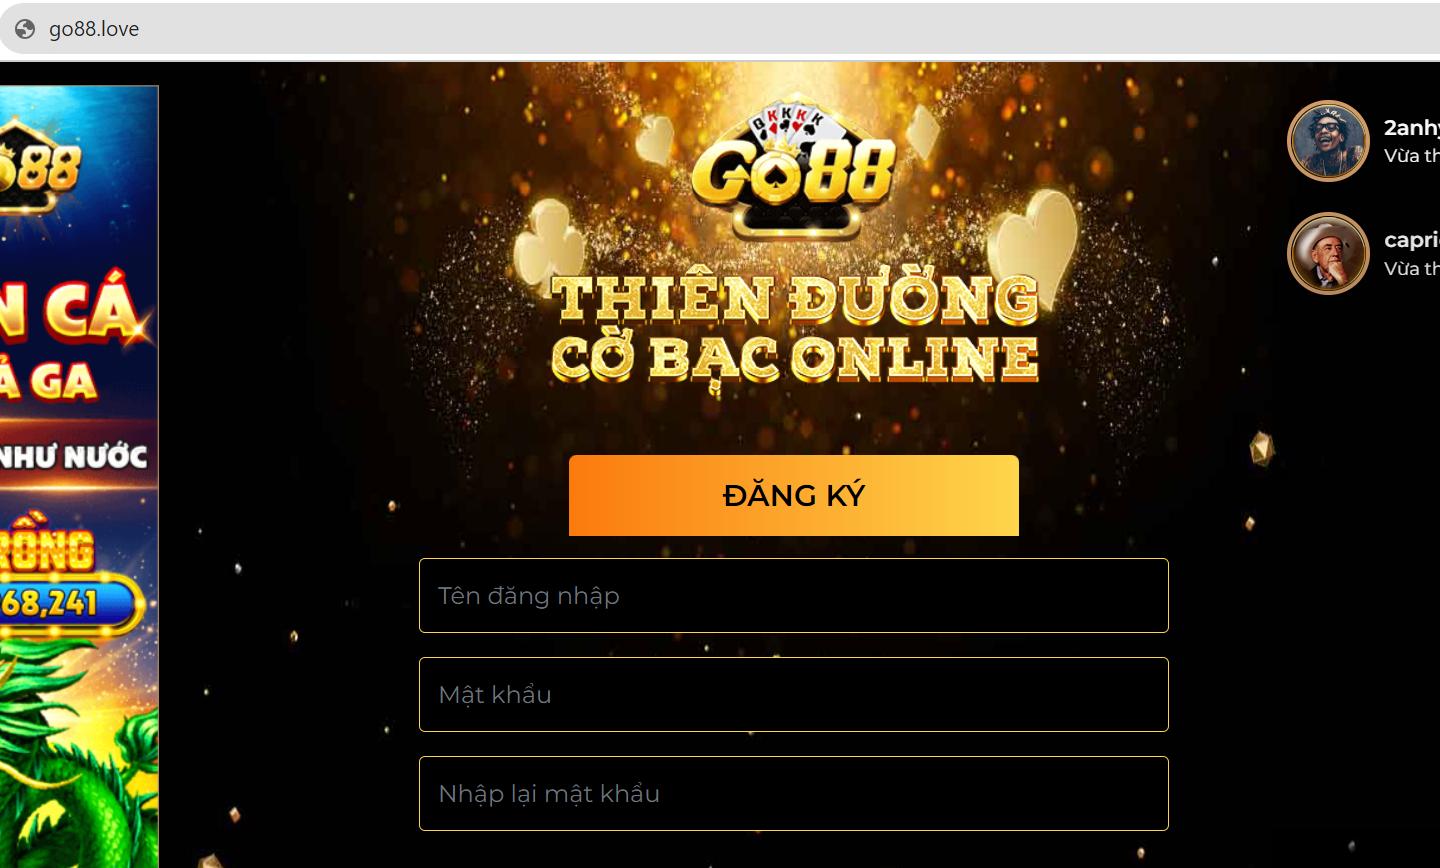 Domain go88.love của cổng game Go88